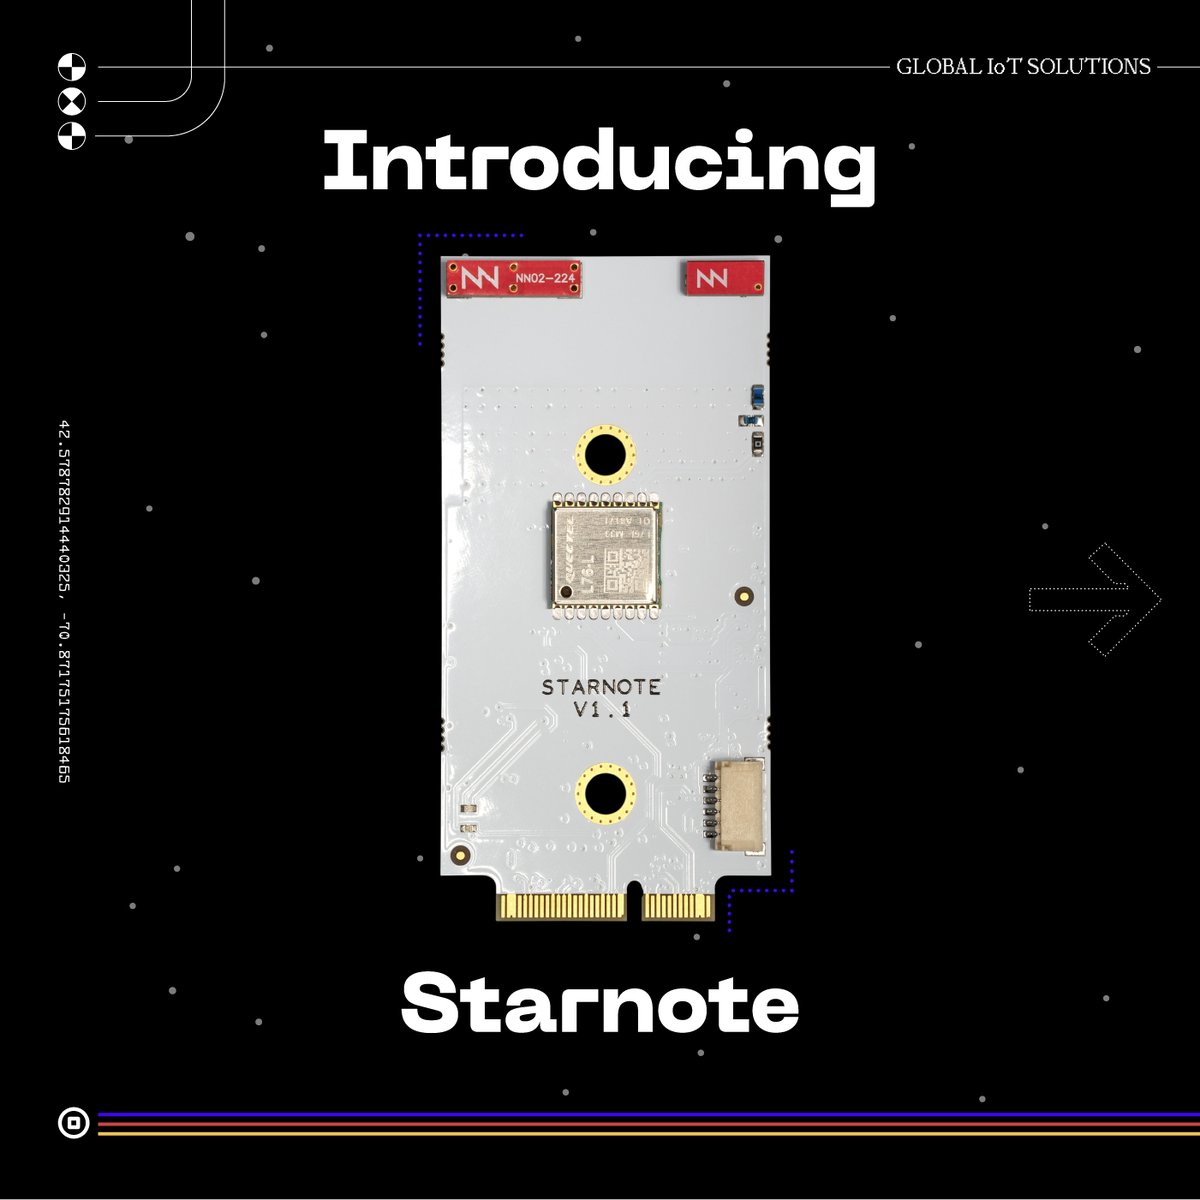 🧵 ICYMI: We unveiled Starnote yesterday, a groundbreaking extension for the Notecard, developed in collaboration with @SkyloTech. This innovative add-on ensures affordable and dependable satellite data connectivity without any monthly charges.